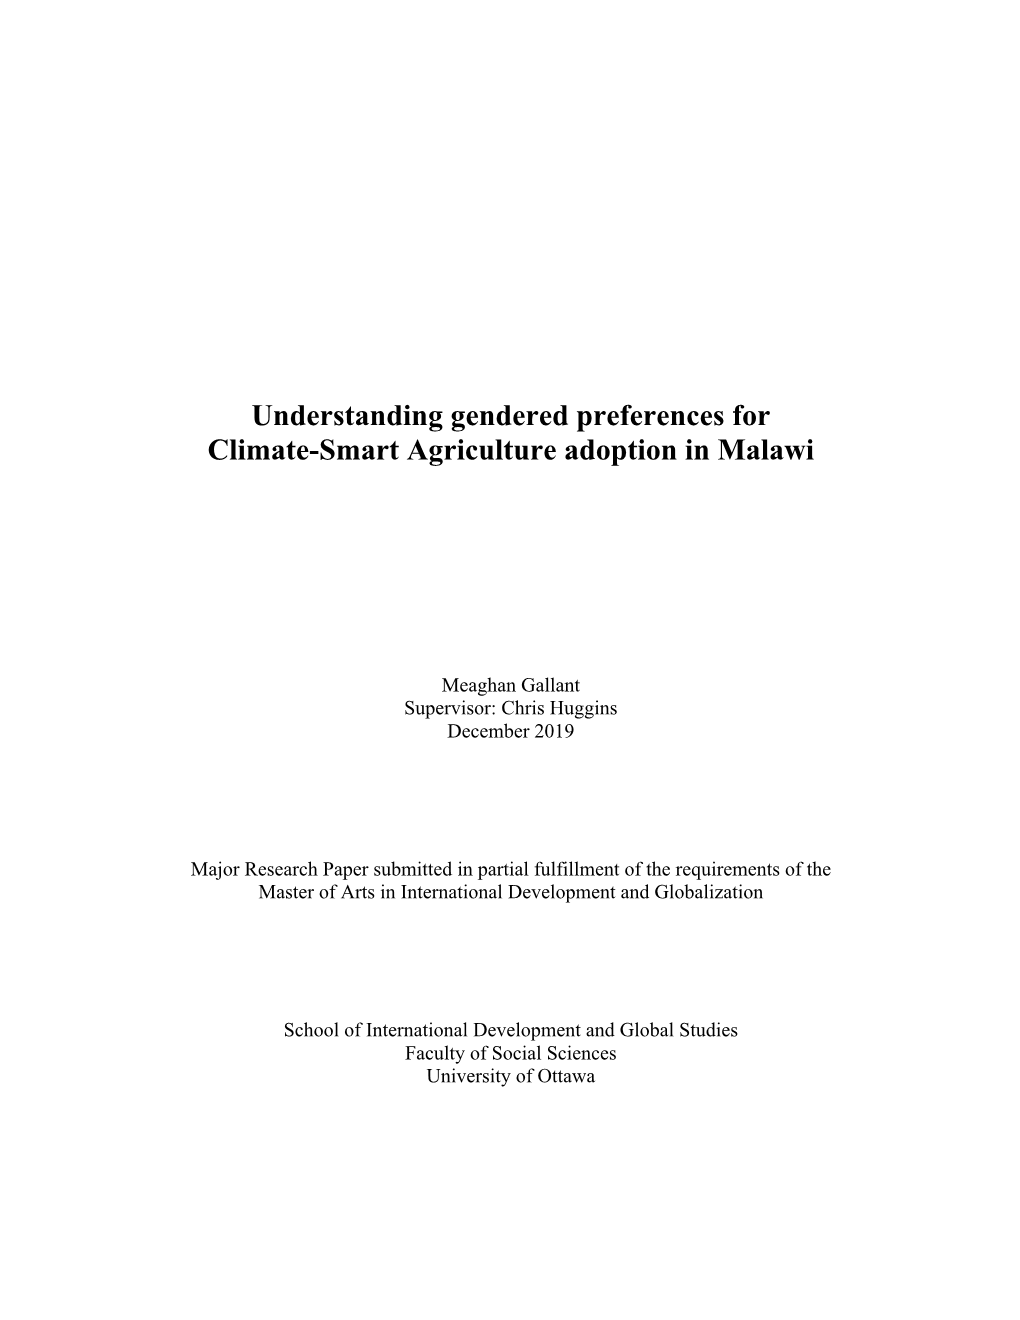 Understanding Gendered Preferences for Climate-Smart Agriculture Adoption in Malawi